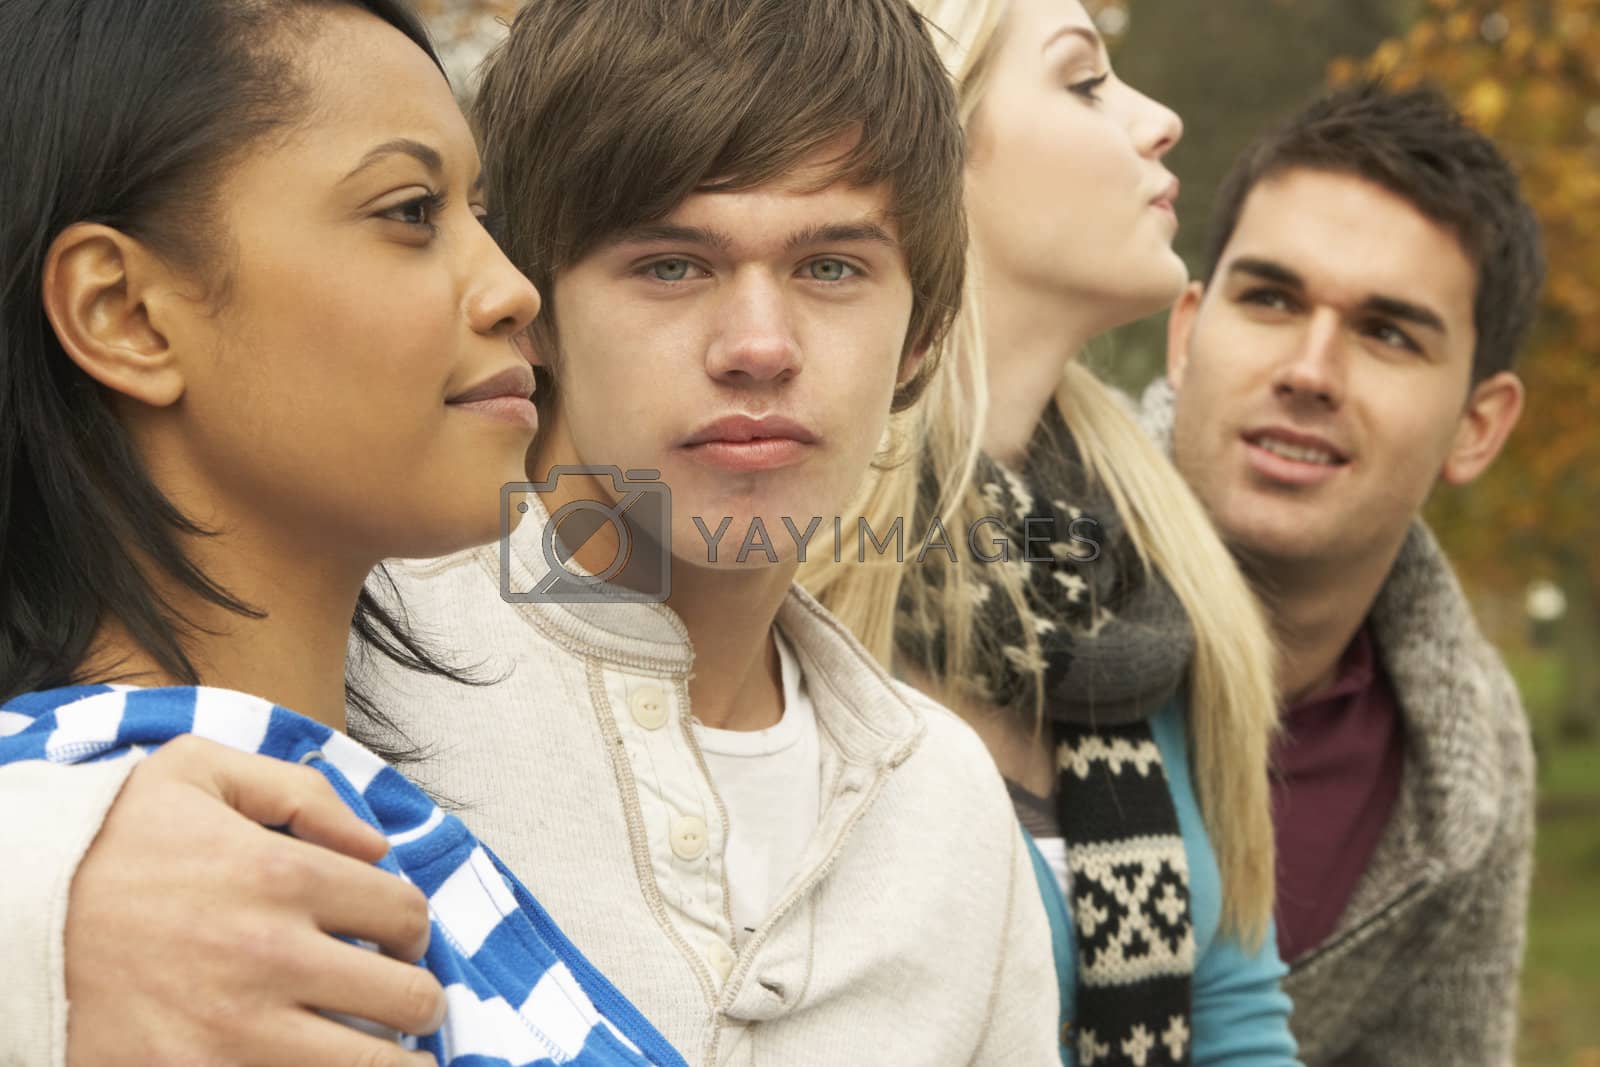 Royalty free image of Close Up Of Group Of Four Teenage Friends In Autumn Woodland by omg_images